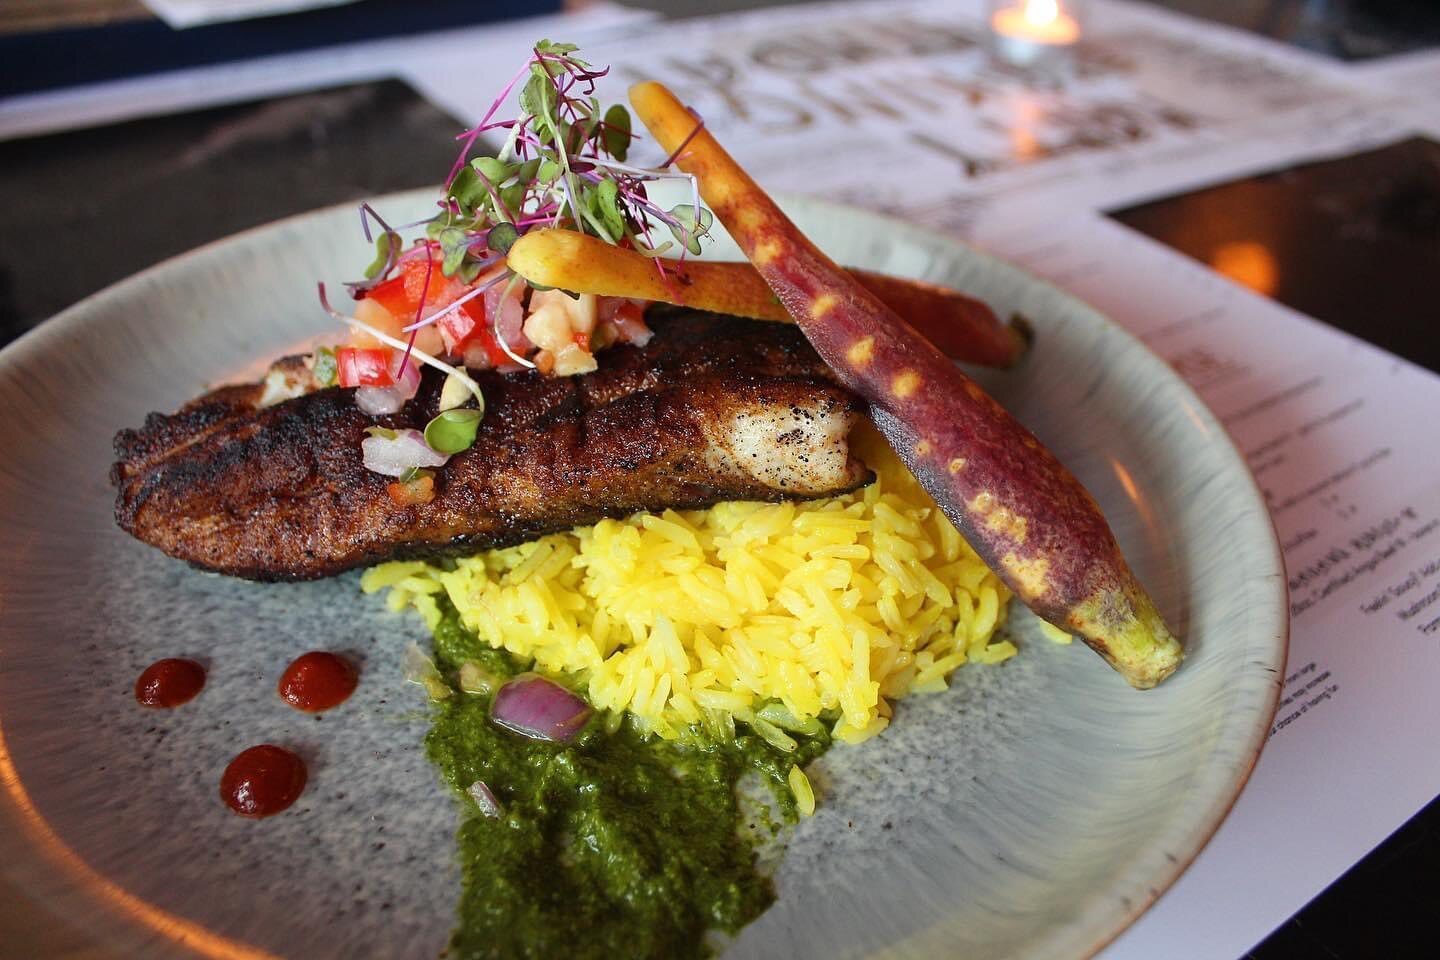 Should we bring this special back?! 

Blackened Seabass &bull; Yellow Rice &bull; Tri- colored Carrots &bull; Finished with Pesto &amp; Sriracha 🤩

#seafood #localrestaurant #finedining #seabass #onlythebest #specials #fresh #madewithlove